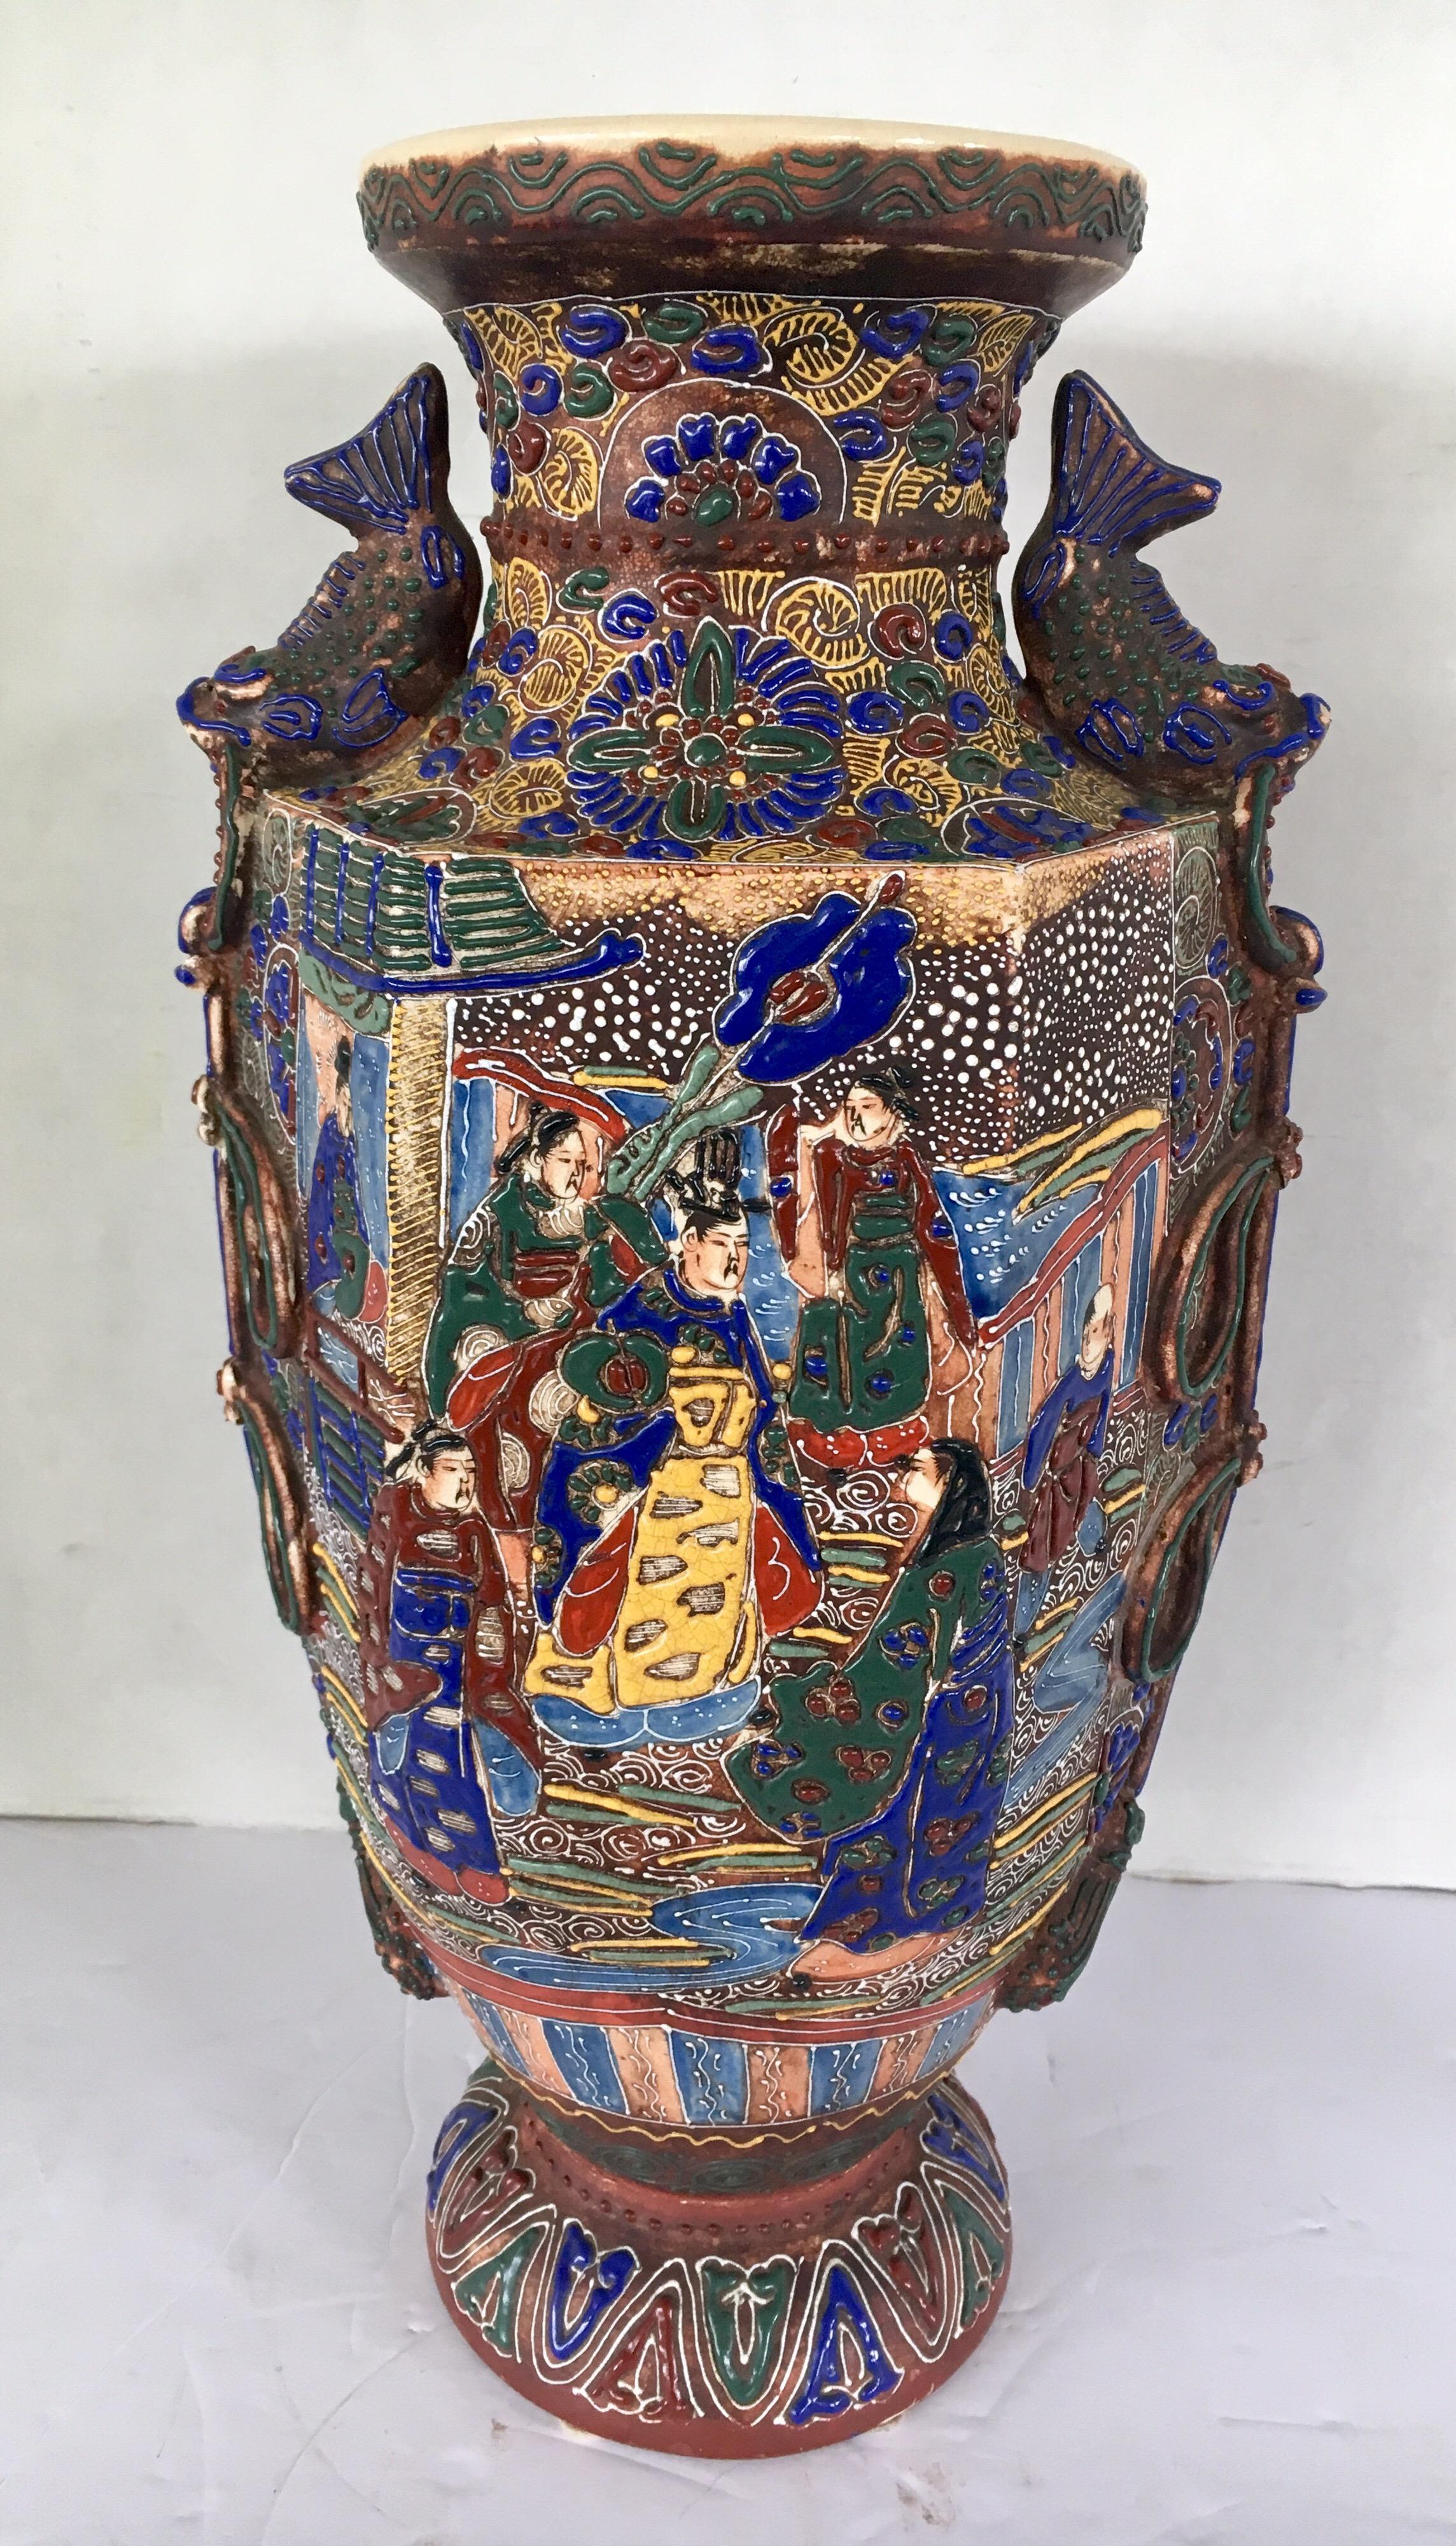 Coveted raised ceramic Satsuma style Japanese Urn. Vivid and vibrant colors throughout.